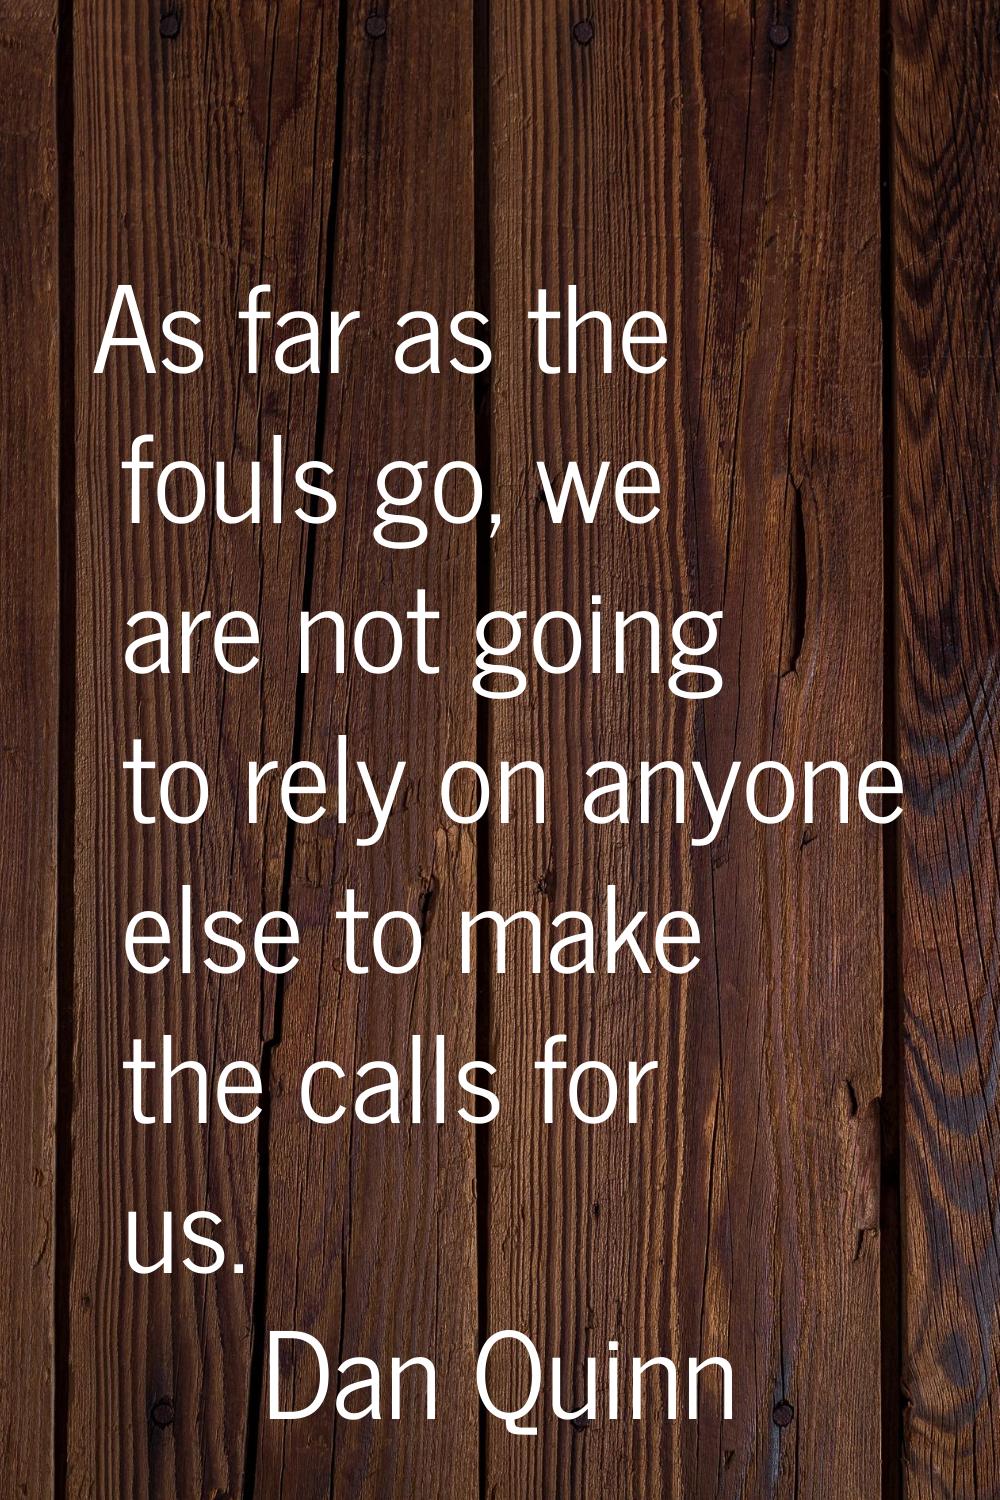 As far as the fouls go, we are not going to rely on anyone else to make the calls for us.